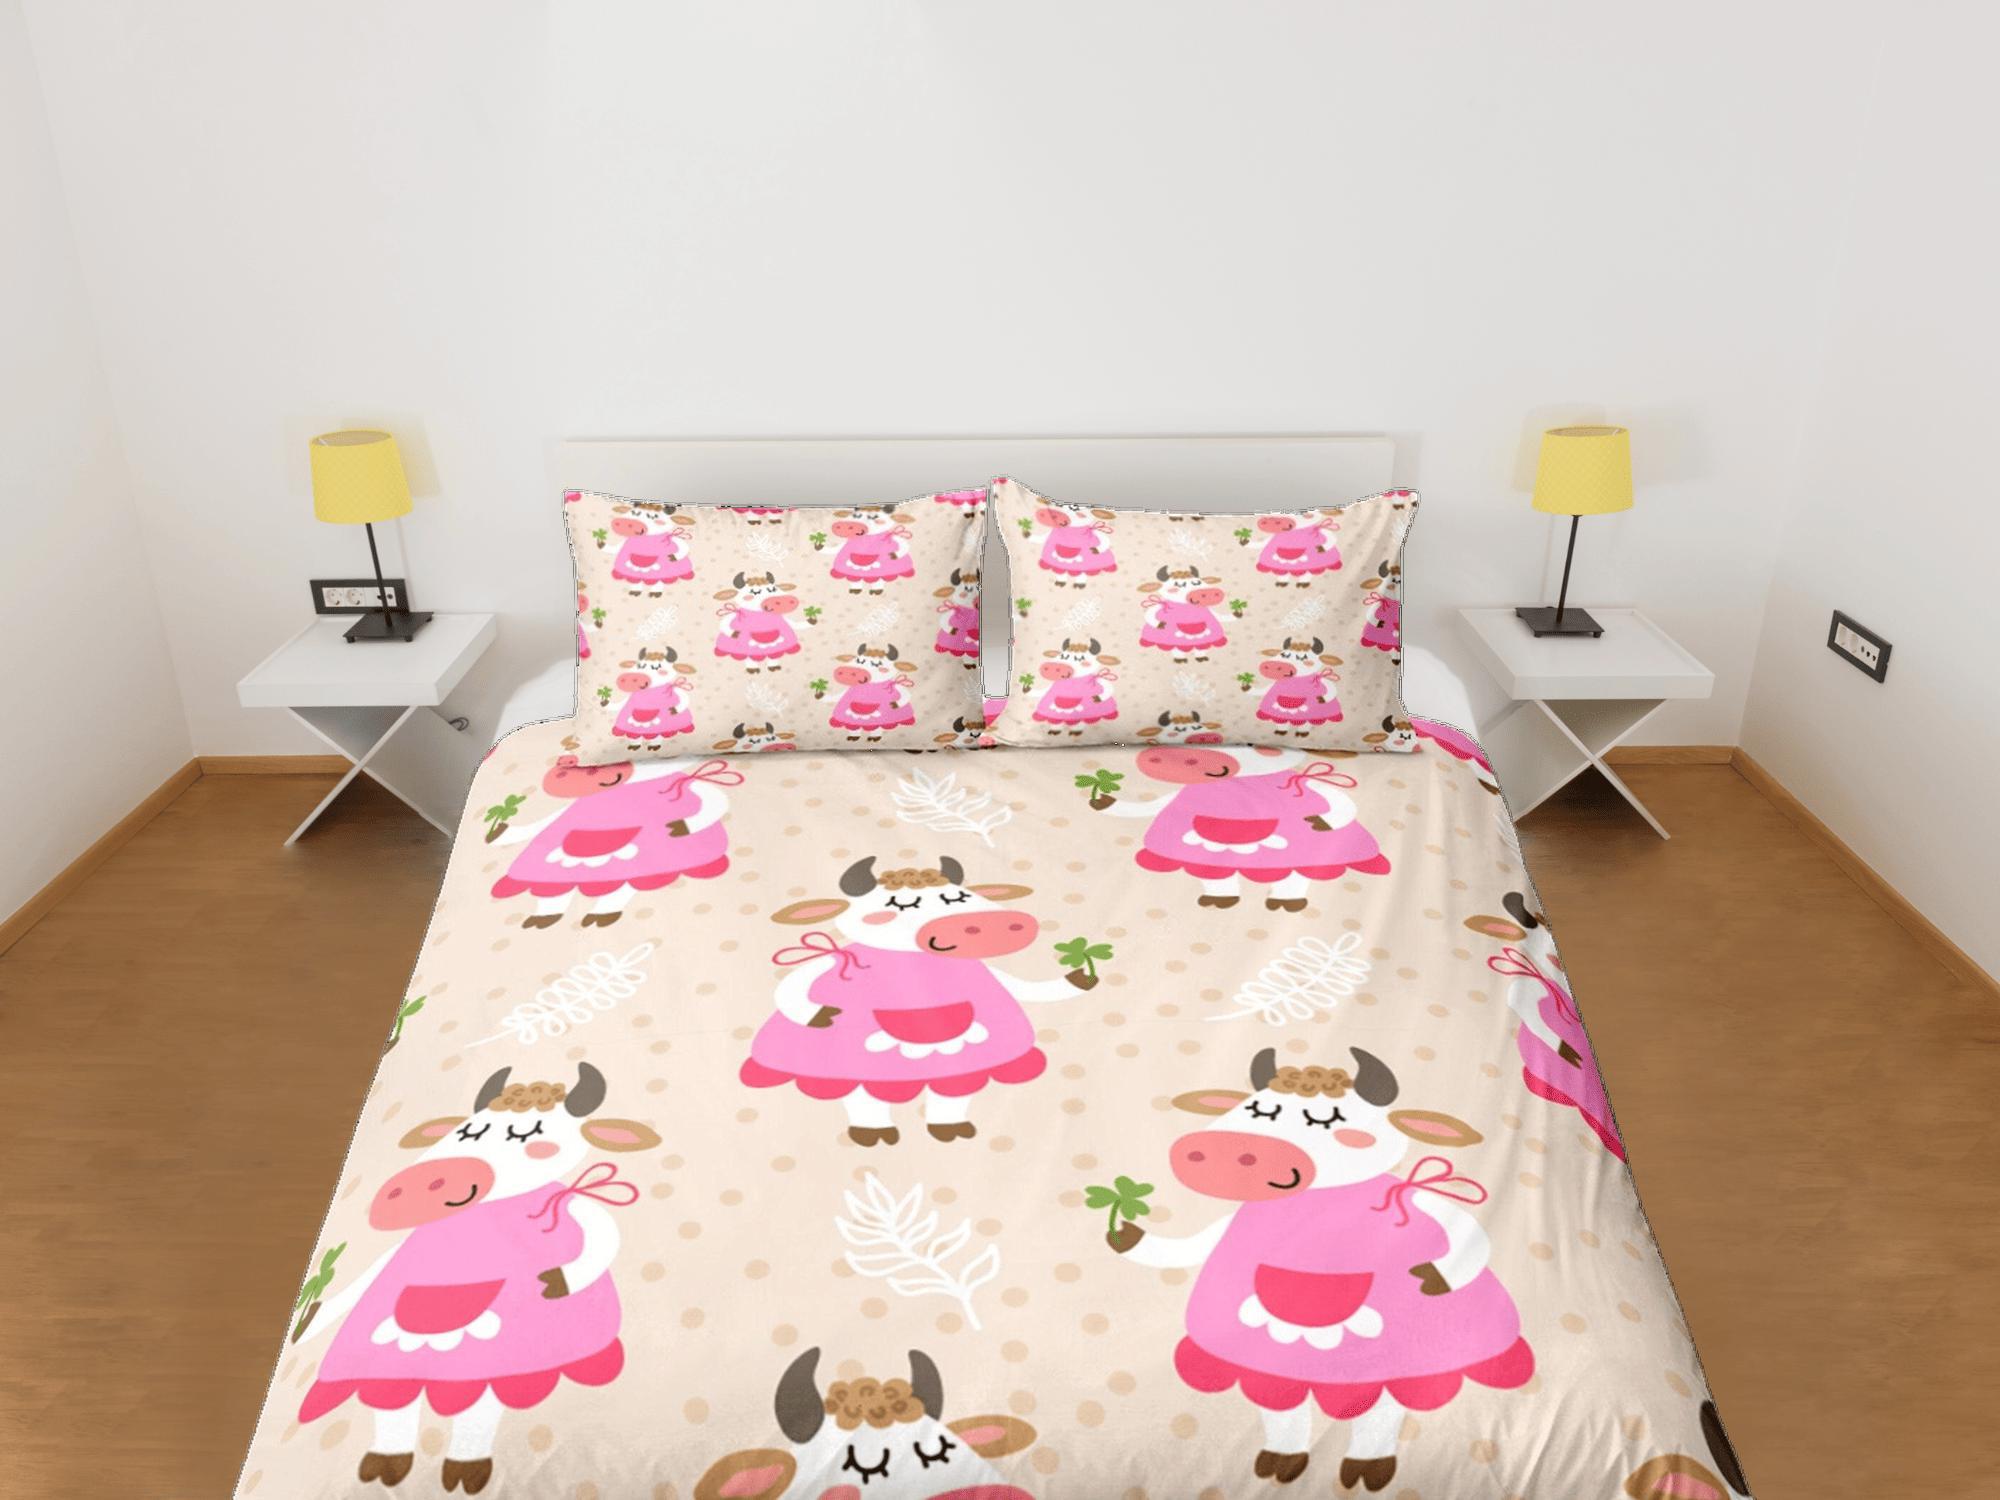 daintyduvet Girly Cow Pink Beige Duvet Cover Set Colorful Bedspread, Kids Full Bedding Set with Pillowcase, Comforter Cover Twin